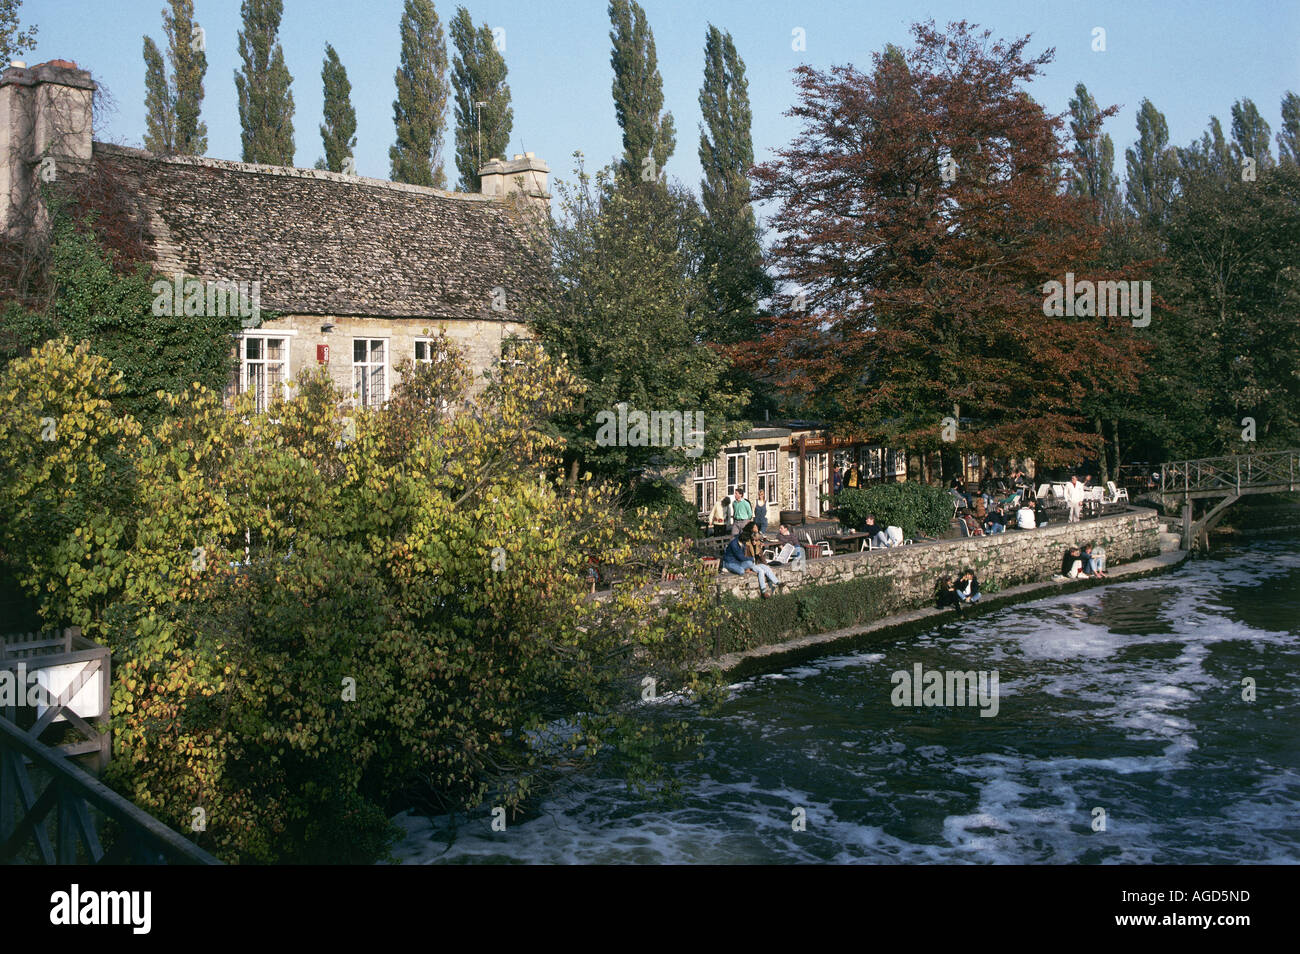 The stone built Trout public house on the banks of the Thames at Godstow stands upon the site of a traveller s hostel which was once used as a resting place for visitors to the nearby abbey People sit along the river bank White foam on the water Stock Photo